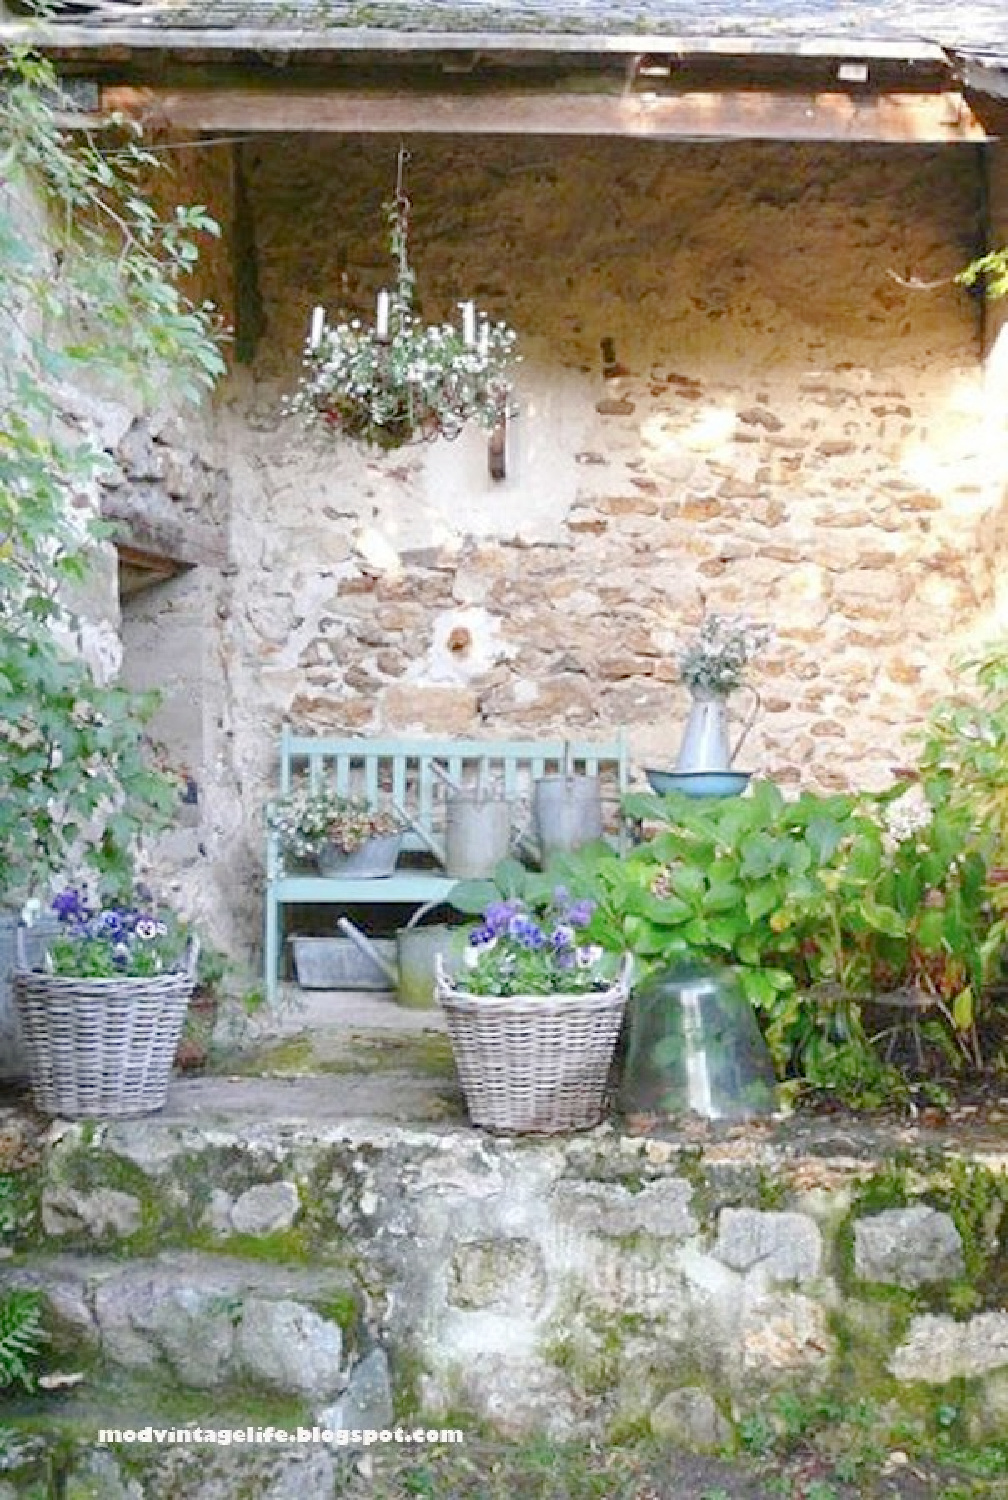 Lovely blue bench against a rustic stone wall. ModVintageLife. #frenchfarmhouse #frenchblue #Frenchgarden